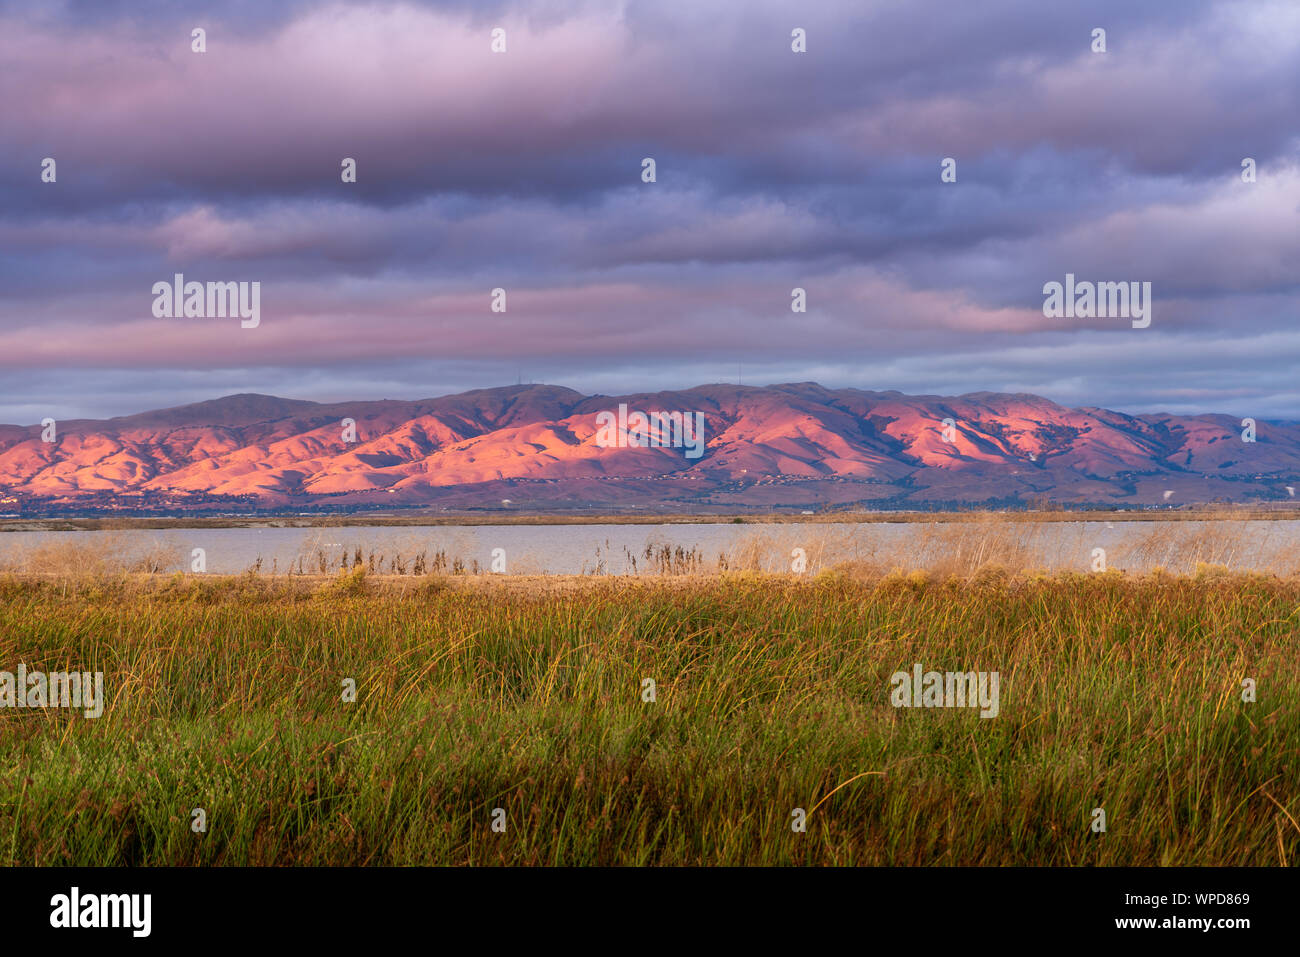 Sunset landscape in South San Francisco bay, colorful clouds covering the sky; mountains slopes and peaks (part of the Diablo mountain range) colored Stock Photo